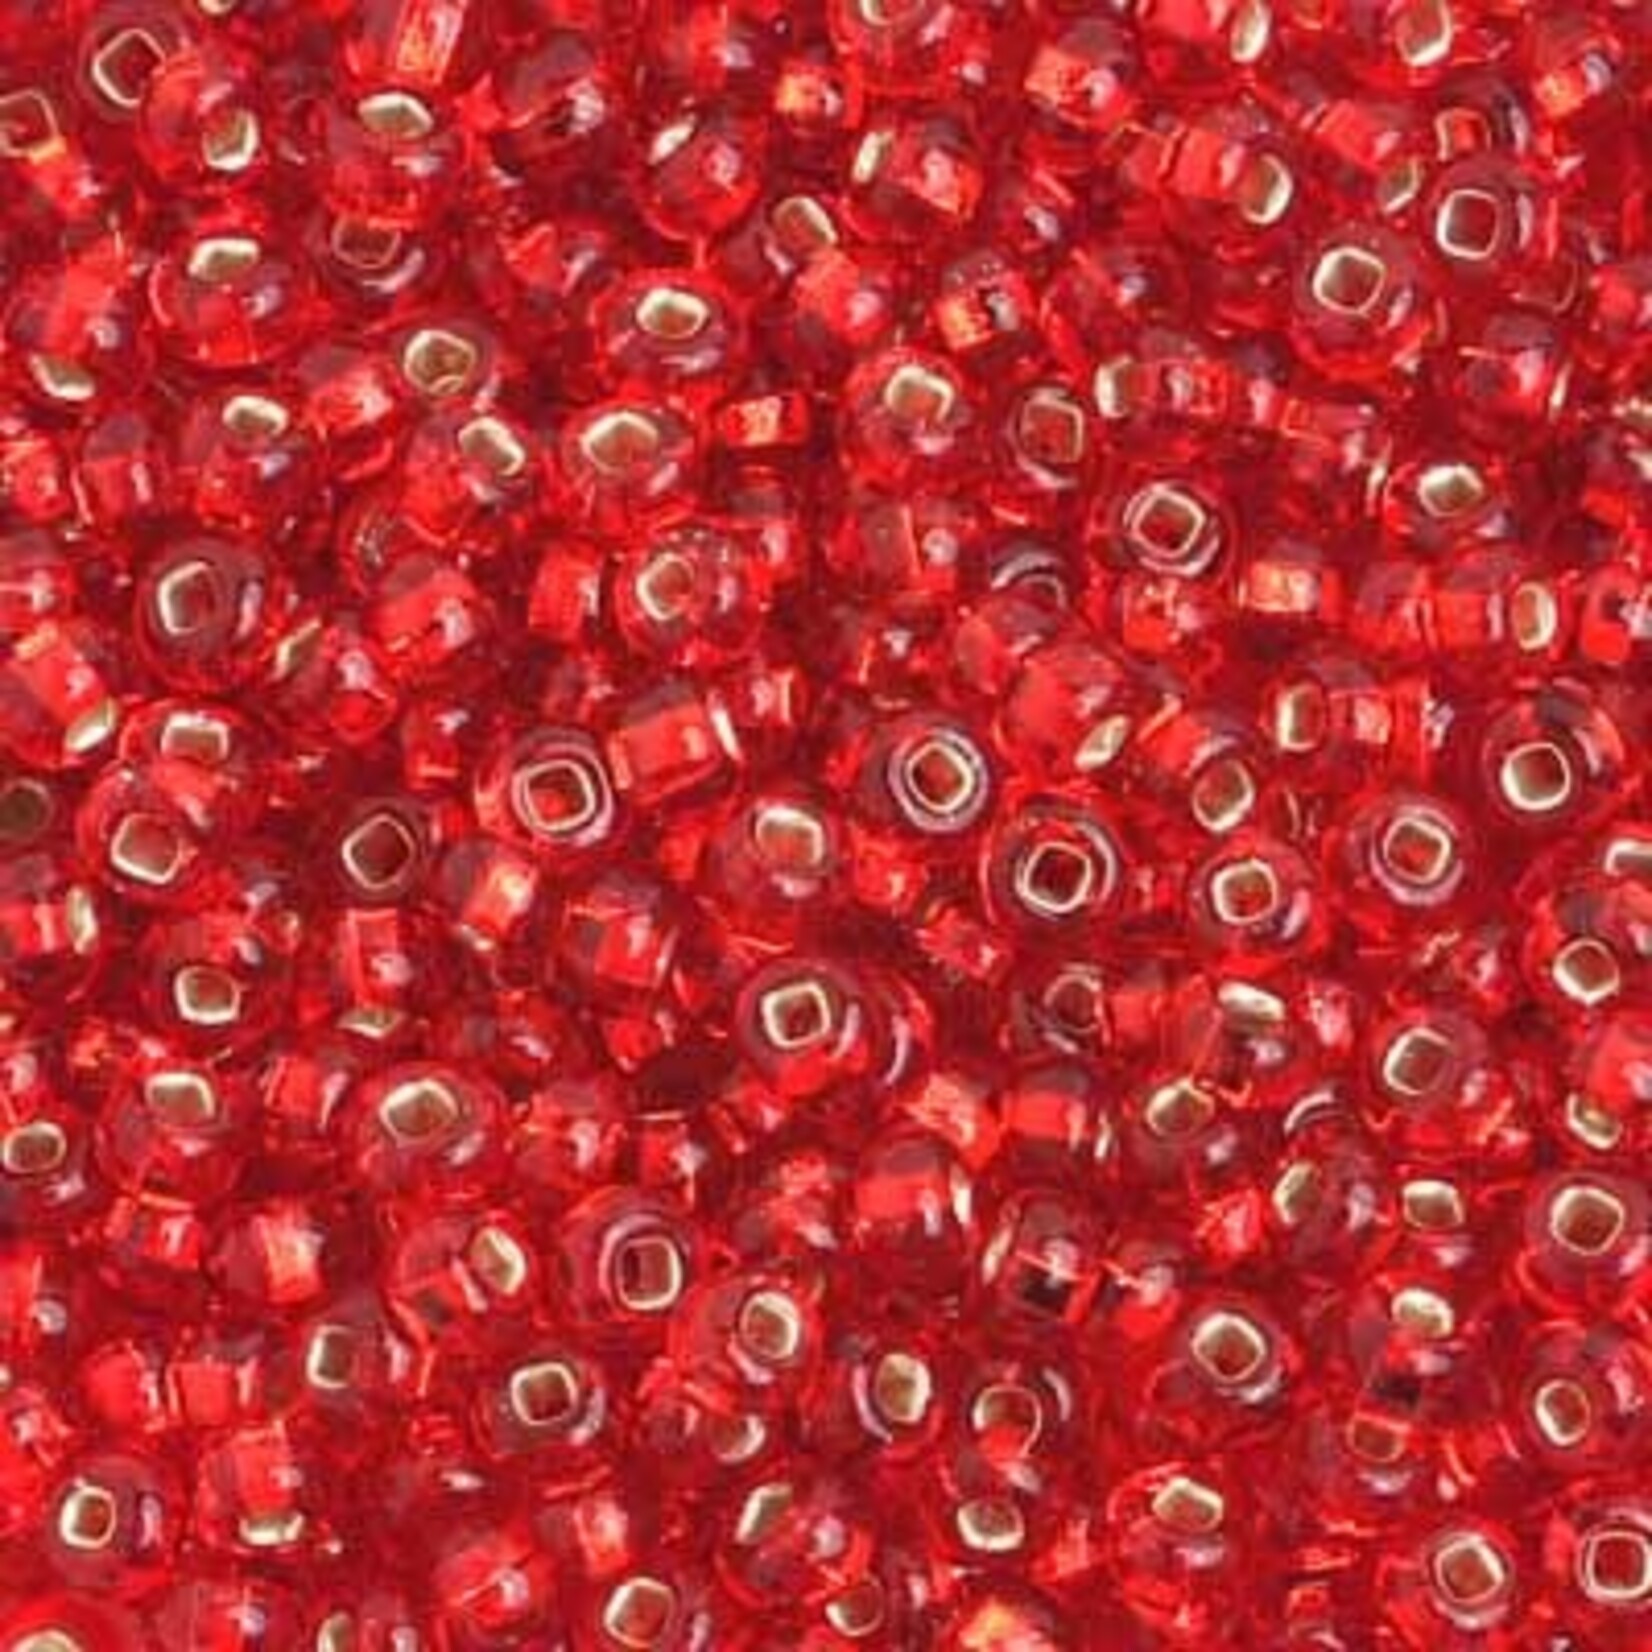 Ponybead (13 grams) Light Red 6/0 Silverlined